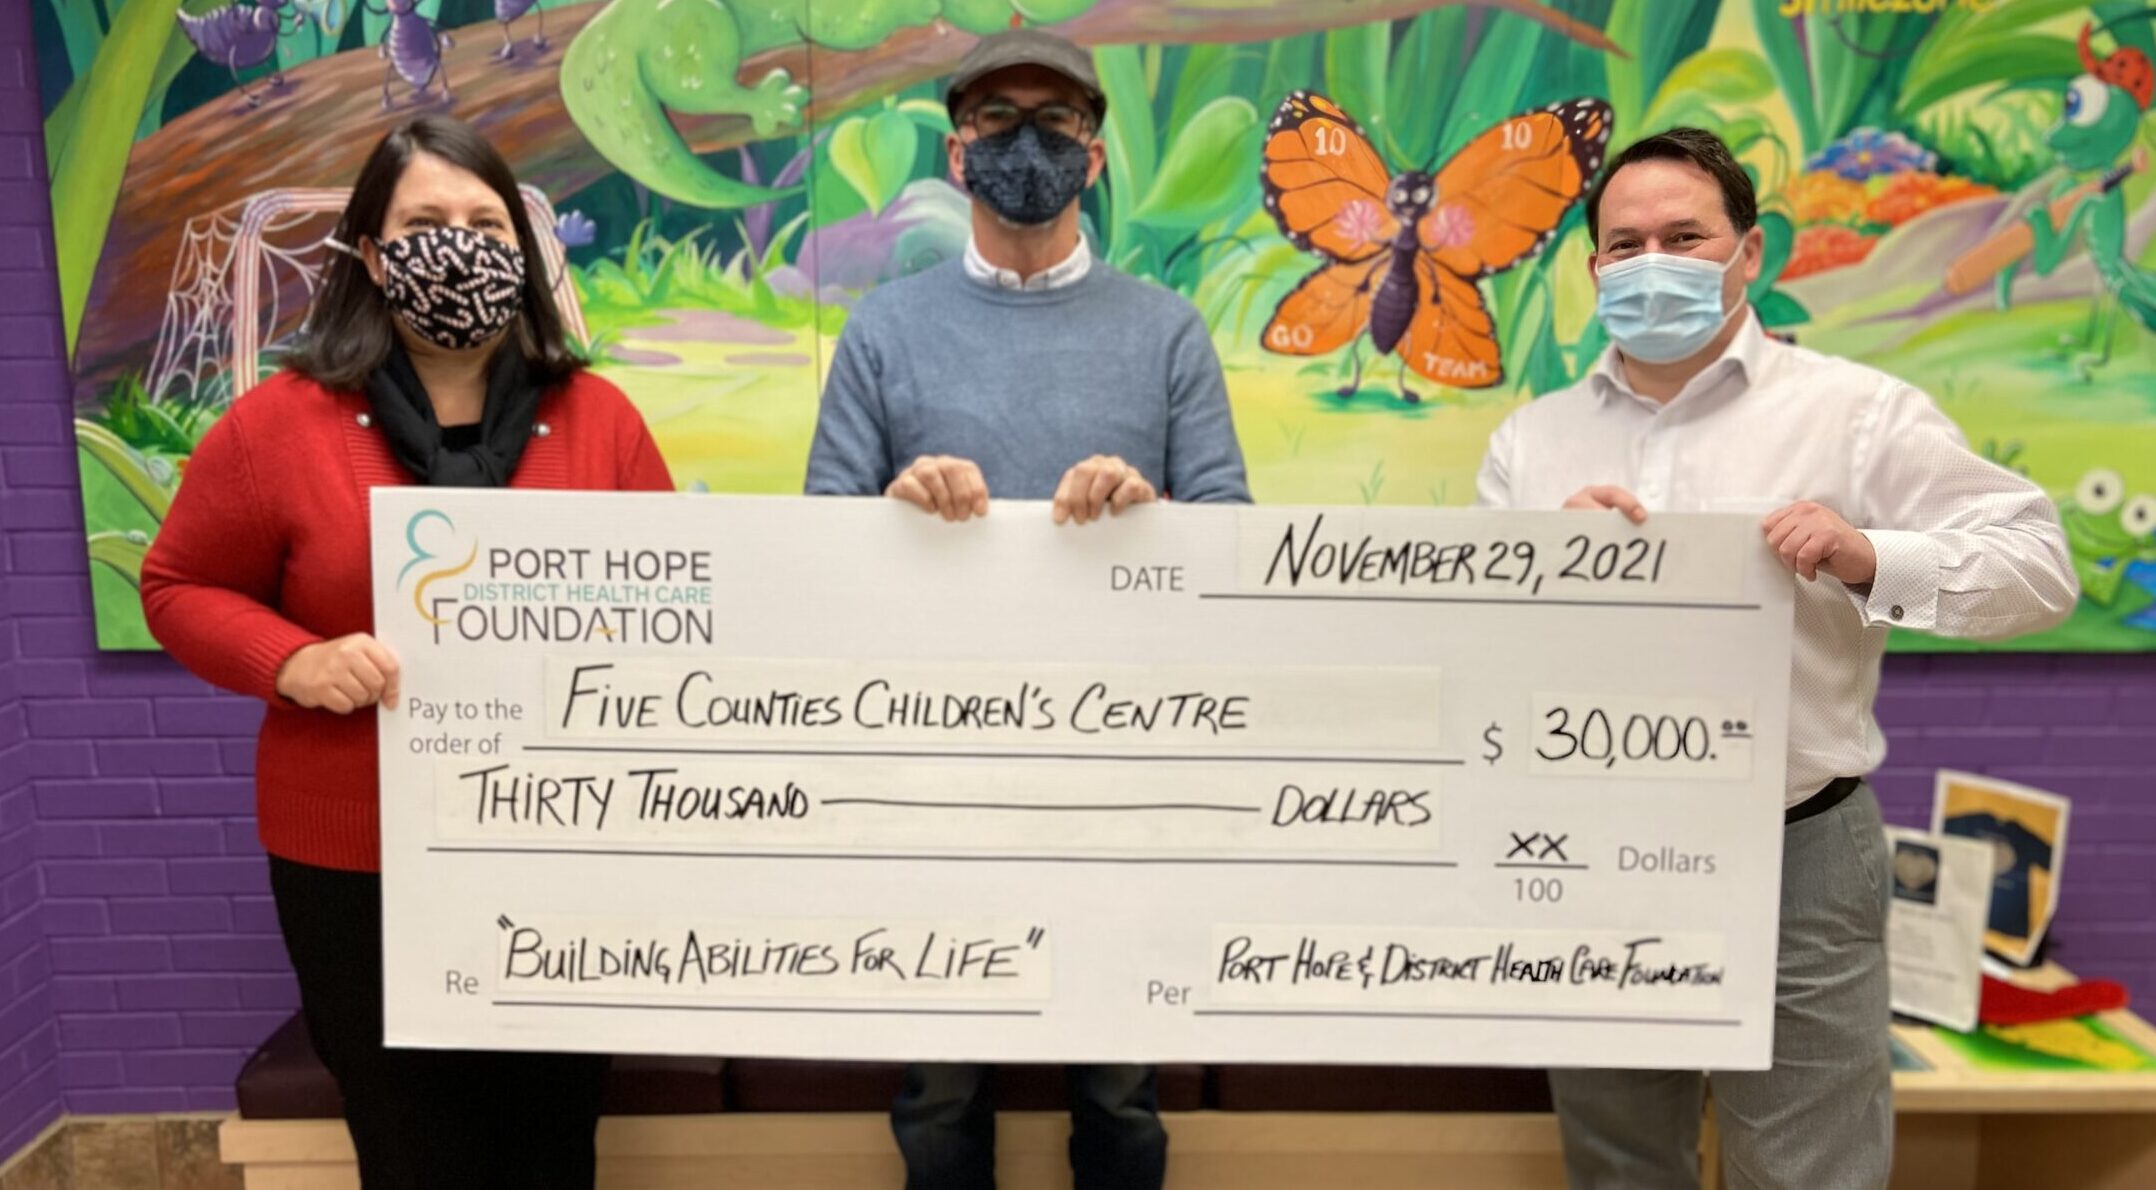 Lyn Giles, FCCC Director Fund Development; Matt Clayton, President of the Port Hope and District Healthcare Foundation; Scott Pepin. FCCC CEO holding a large cheque made payable to Five Counties Children's Centre for $30, 000.